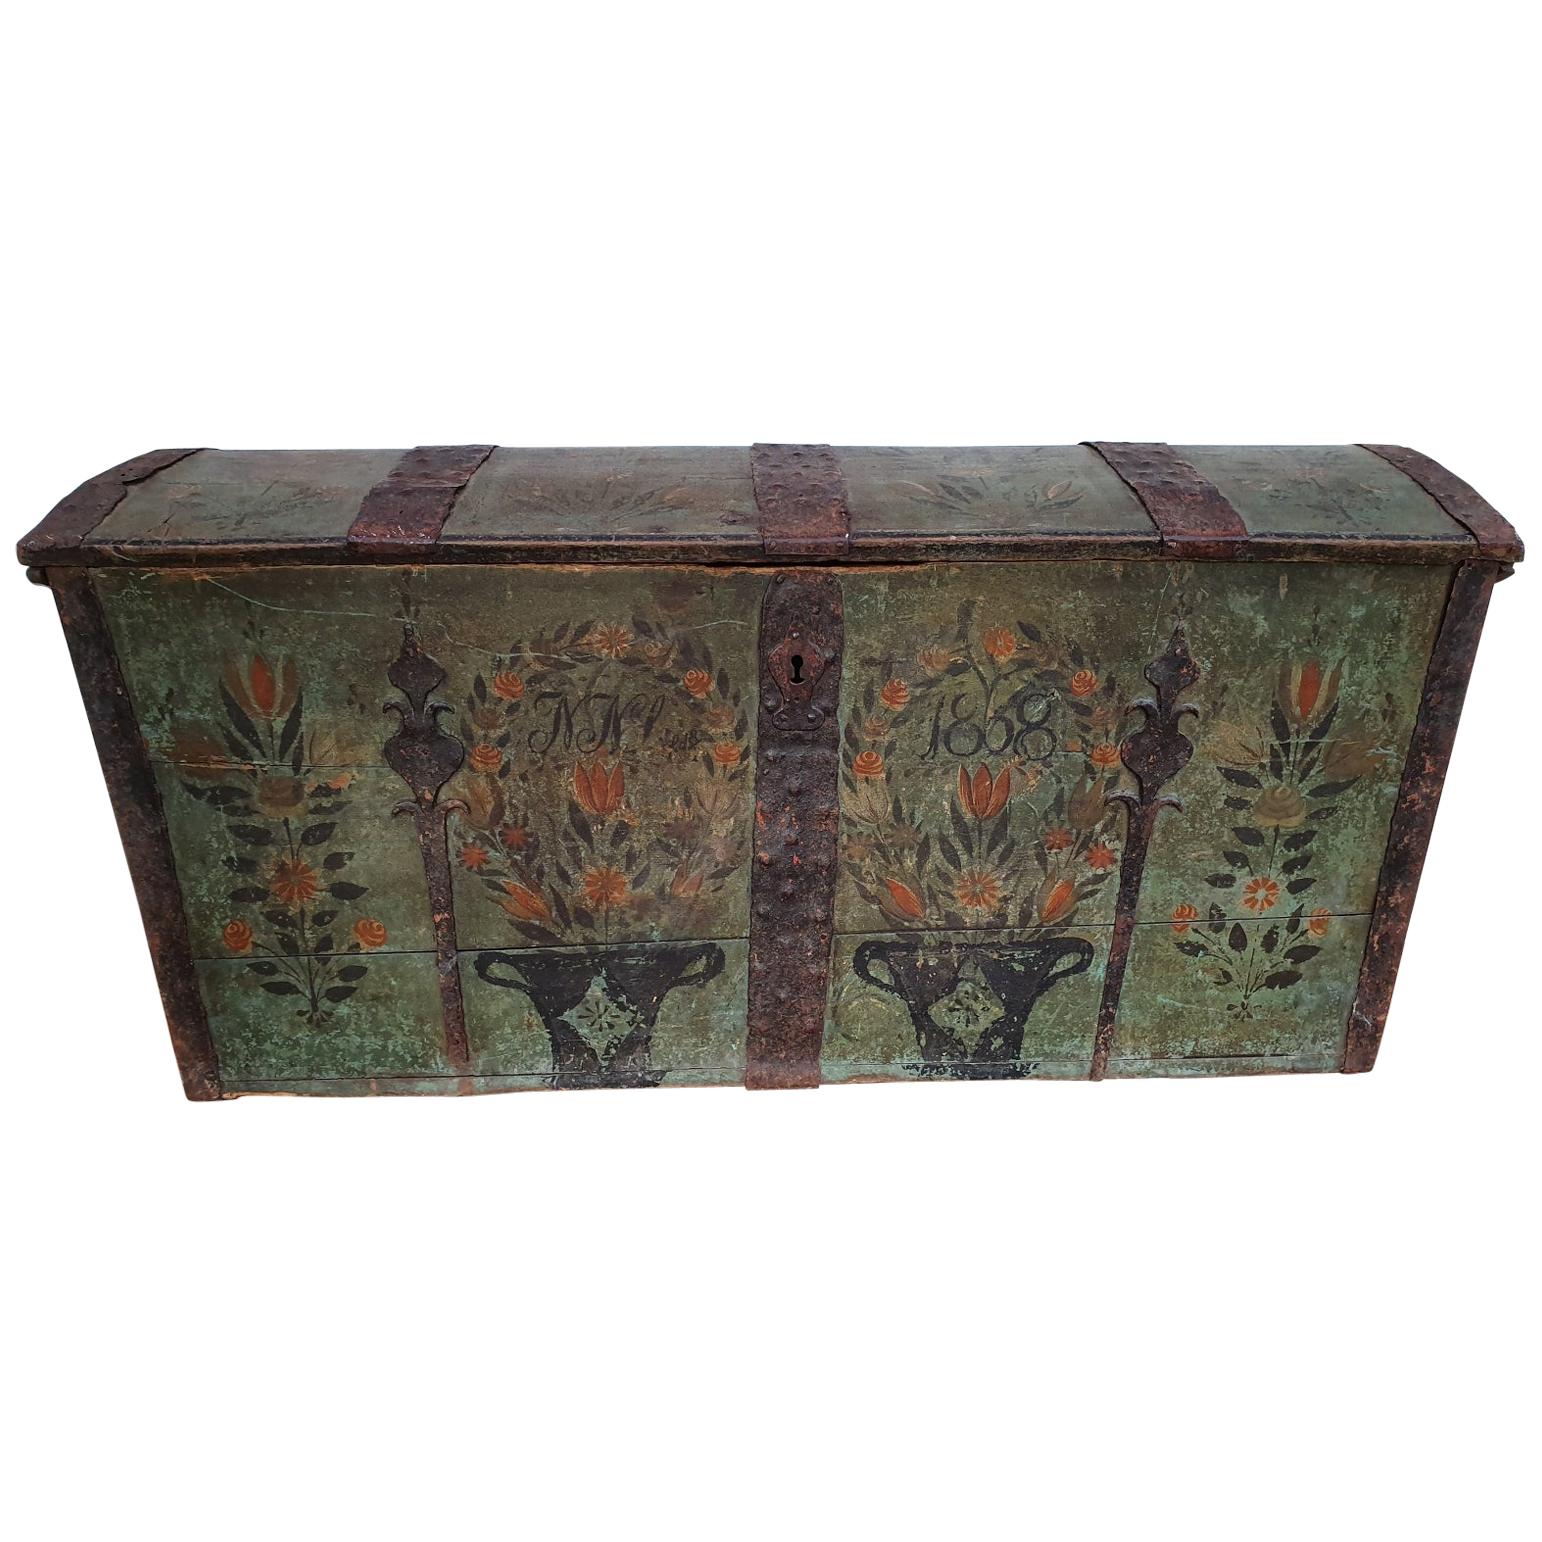 Original Swedish Wooden Chest from 1868, Oakwood, Copper Fittings For Sale